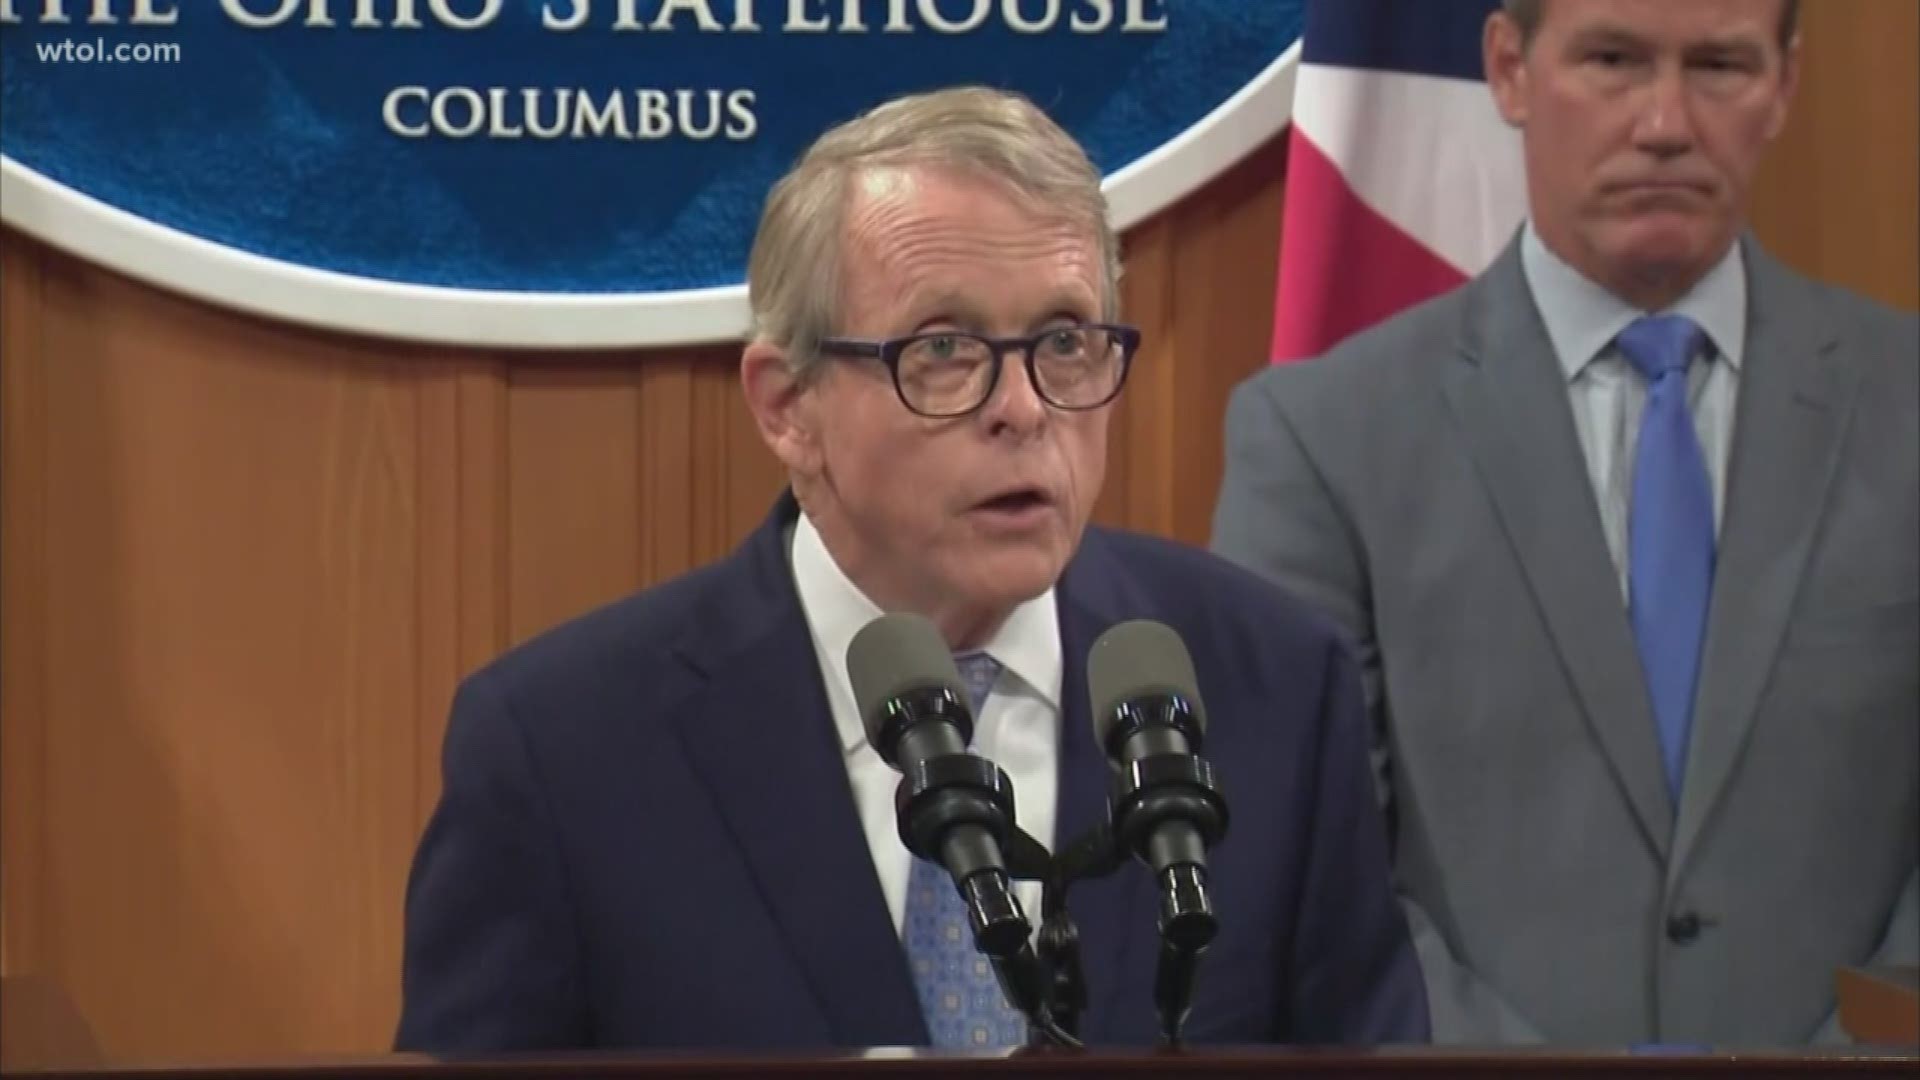 Governor plans to take action to enhance the state and federal background check systems. DeWine seeks to improve law enforcement databases.